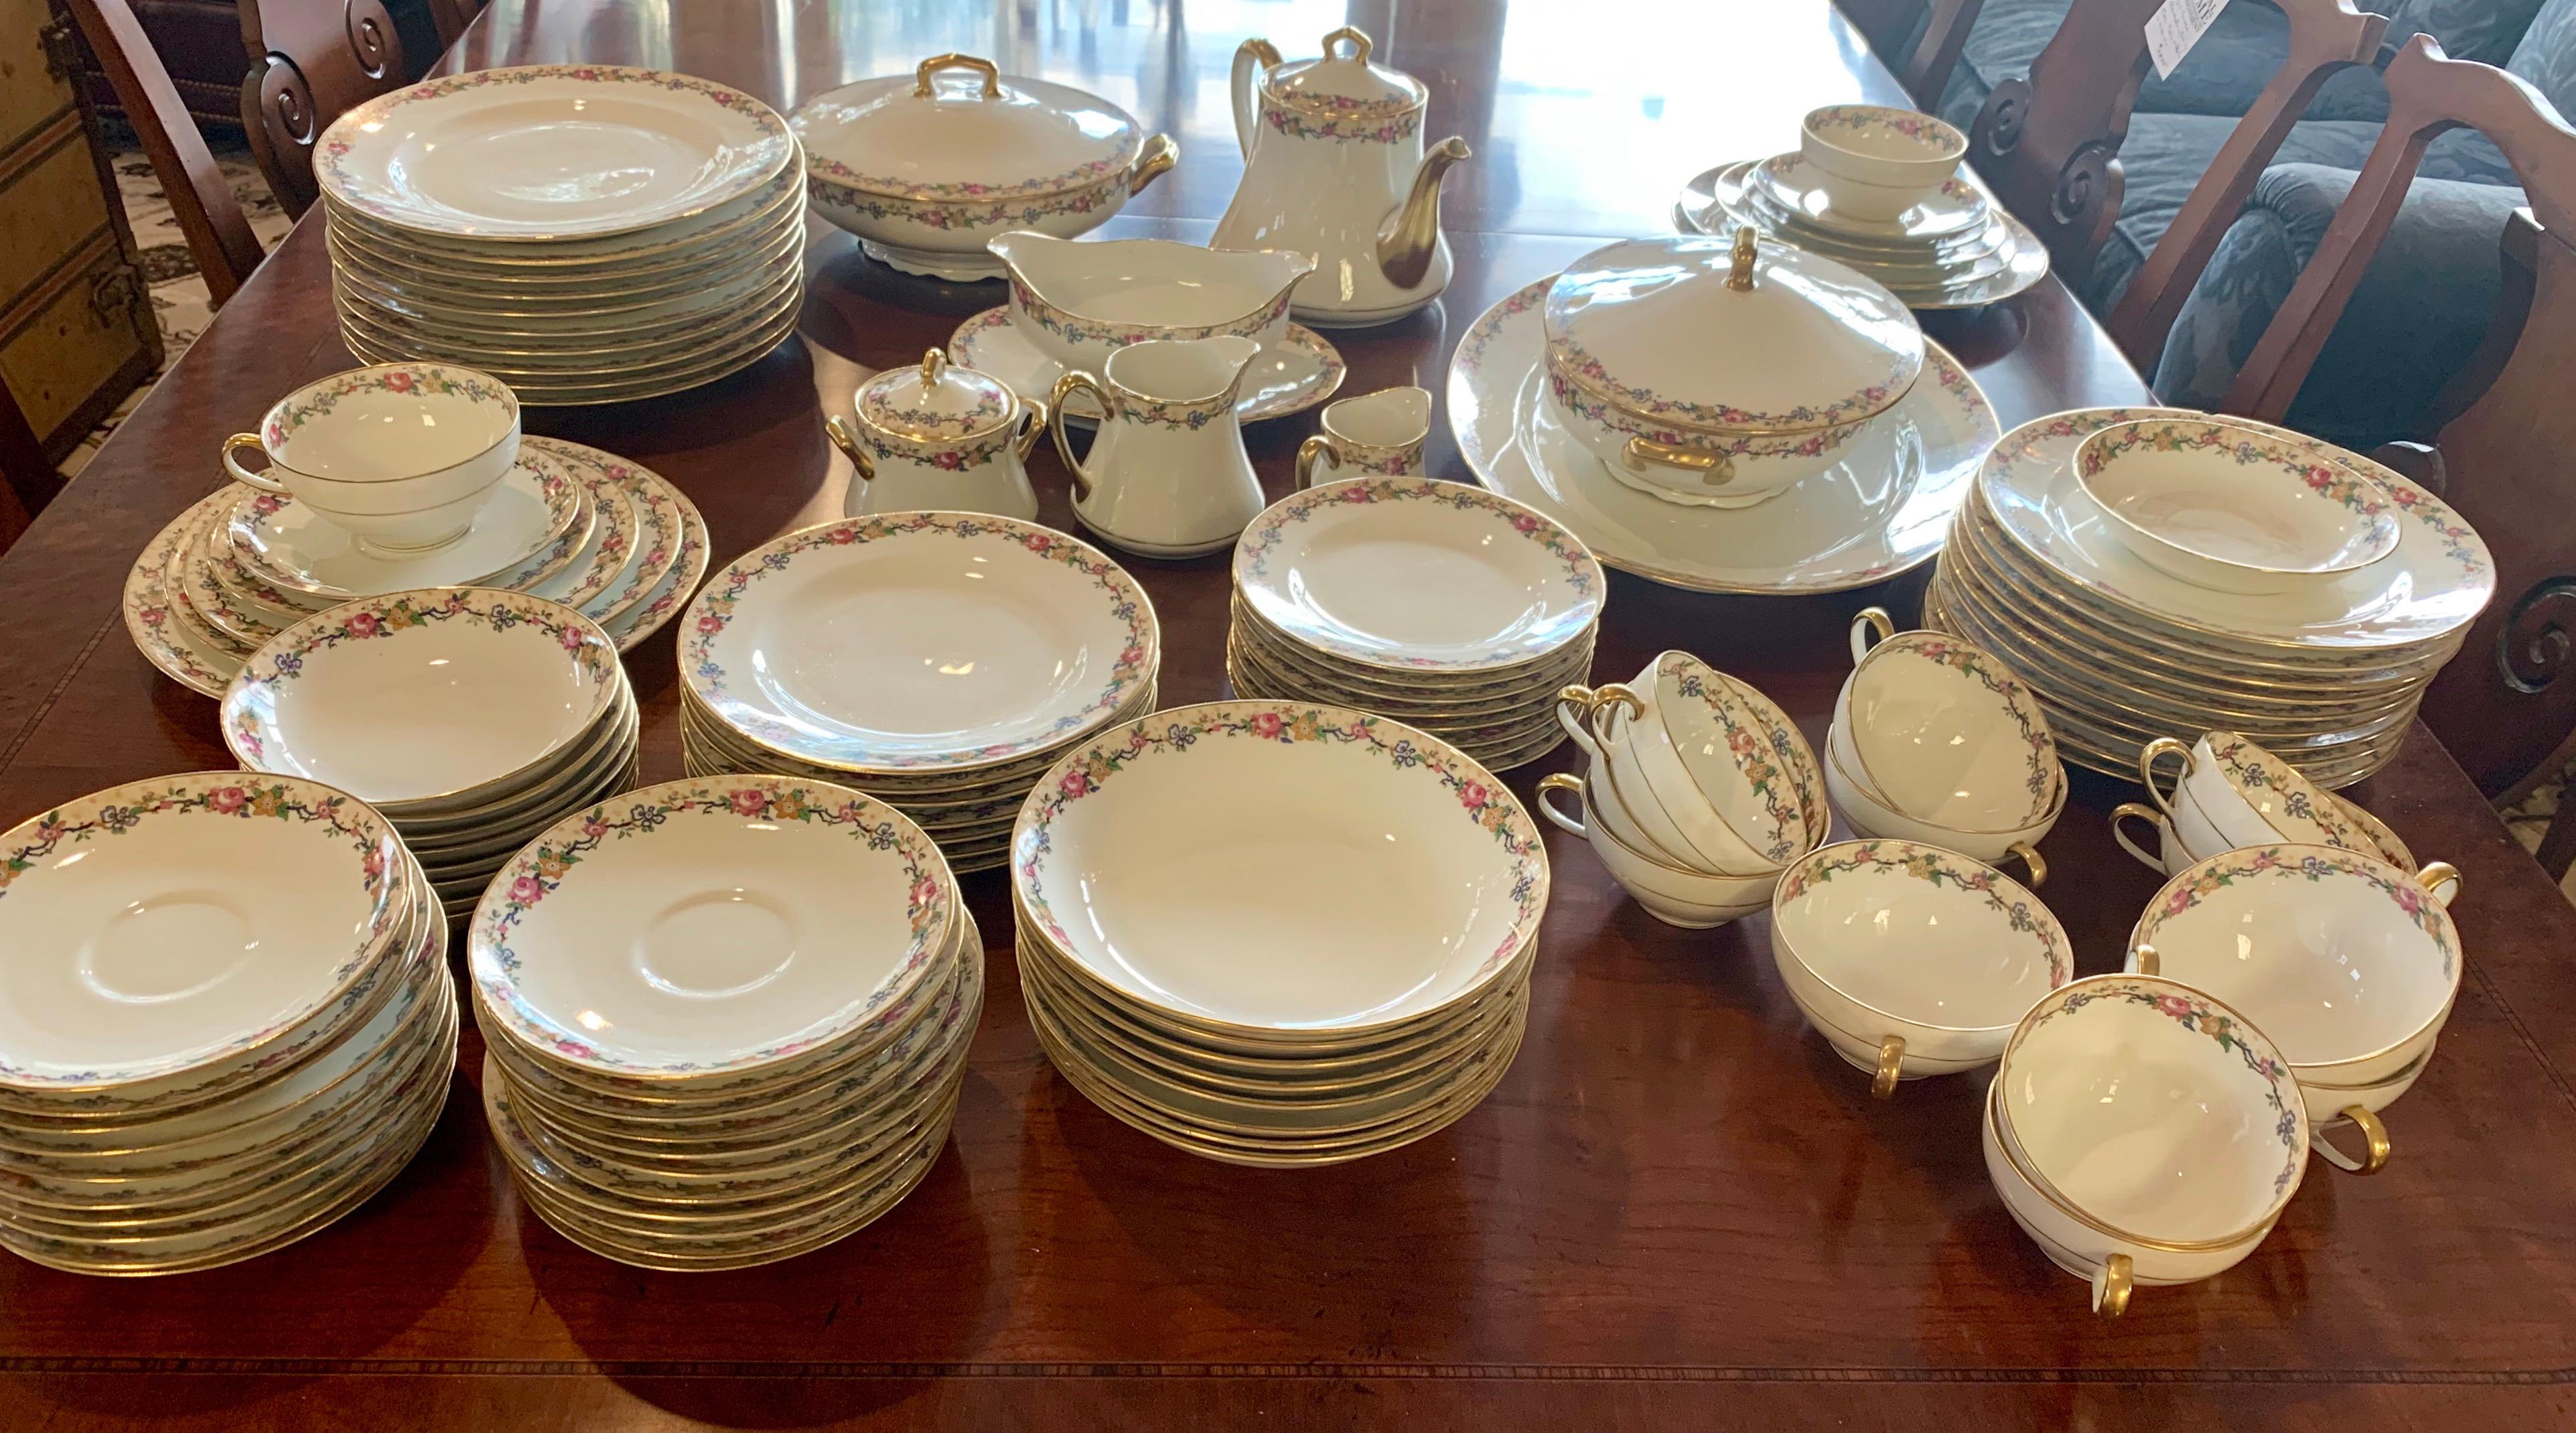 Stunning, antique Limoges fine porcelain china set with serve for twelve as well as serving pieces.
Please see attached pictures to get an idea of detail. All Limoges hallmarks are below as well as Tildem Thurber, Providence, RI; the company that